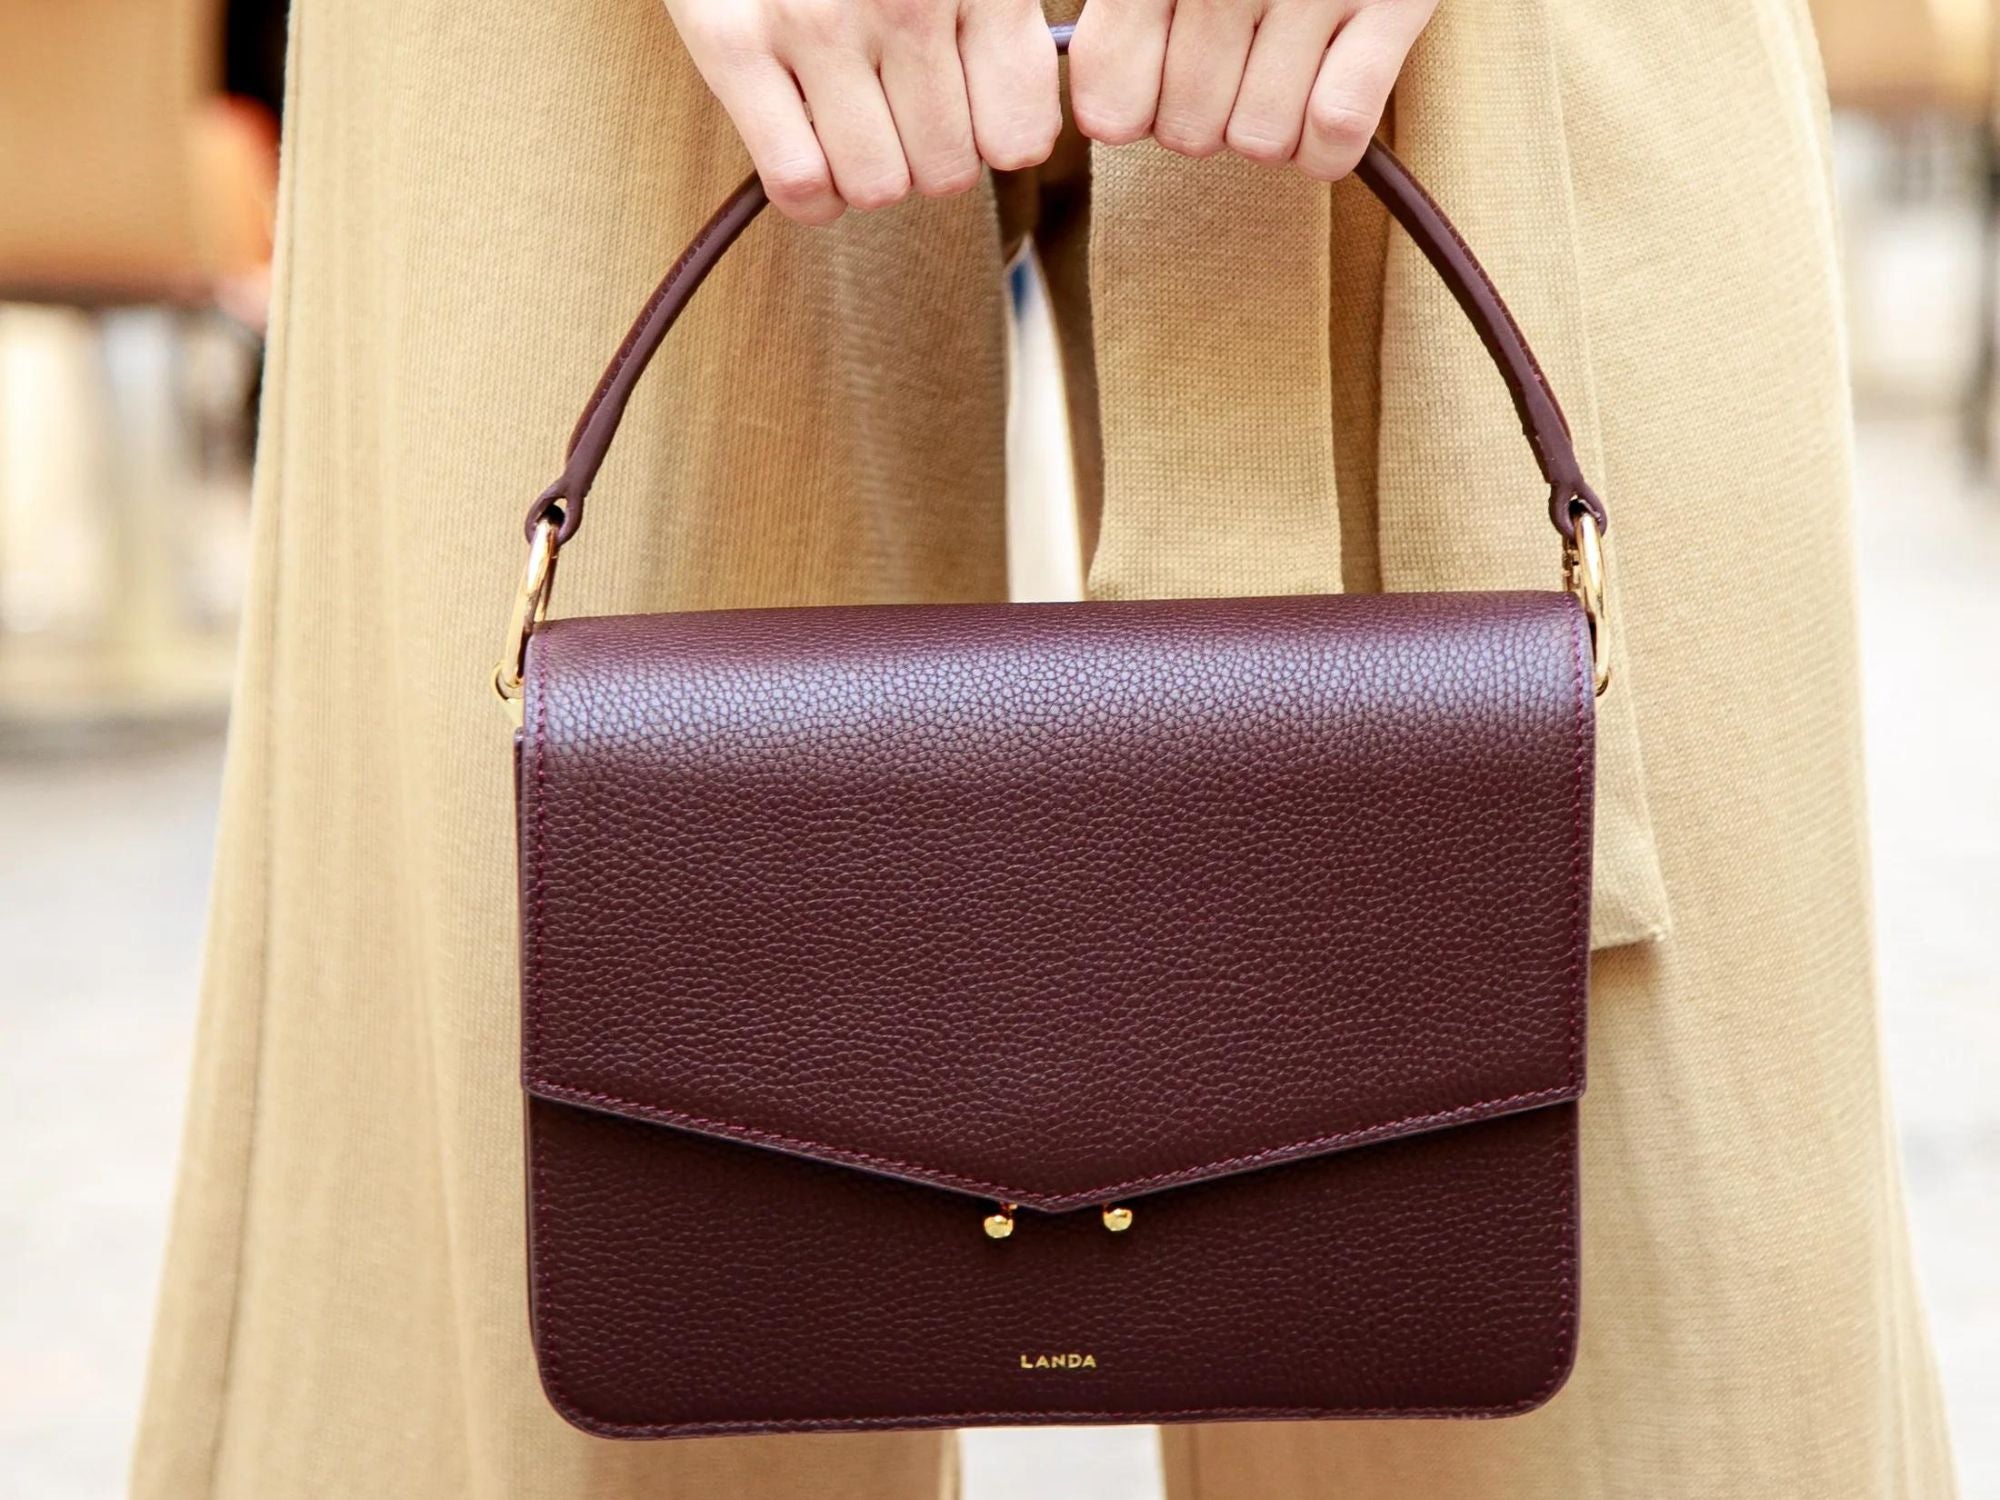 How to Care for Your Luxury Handbag